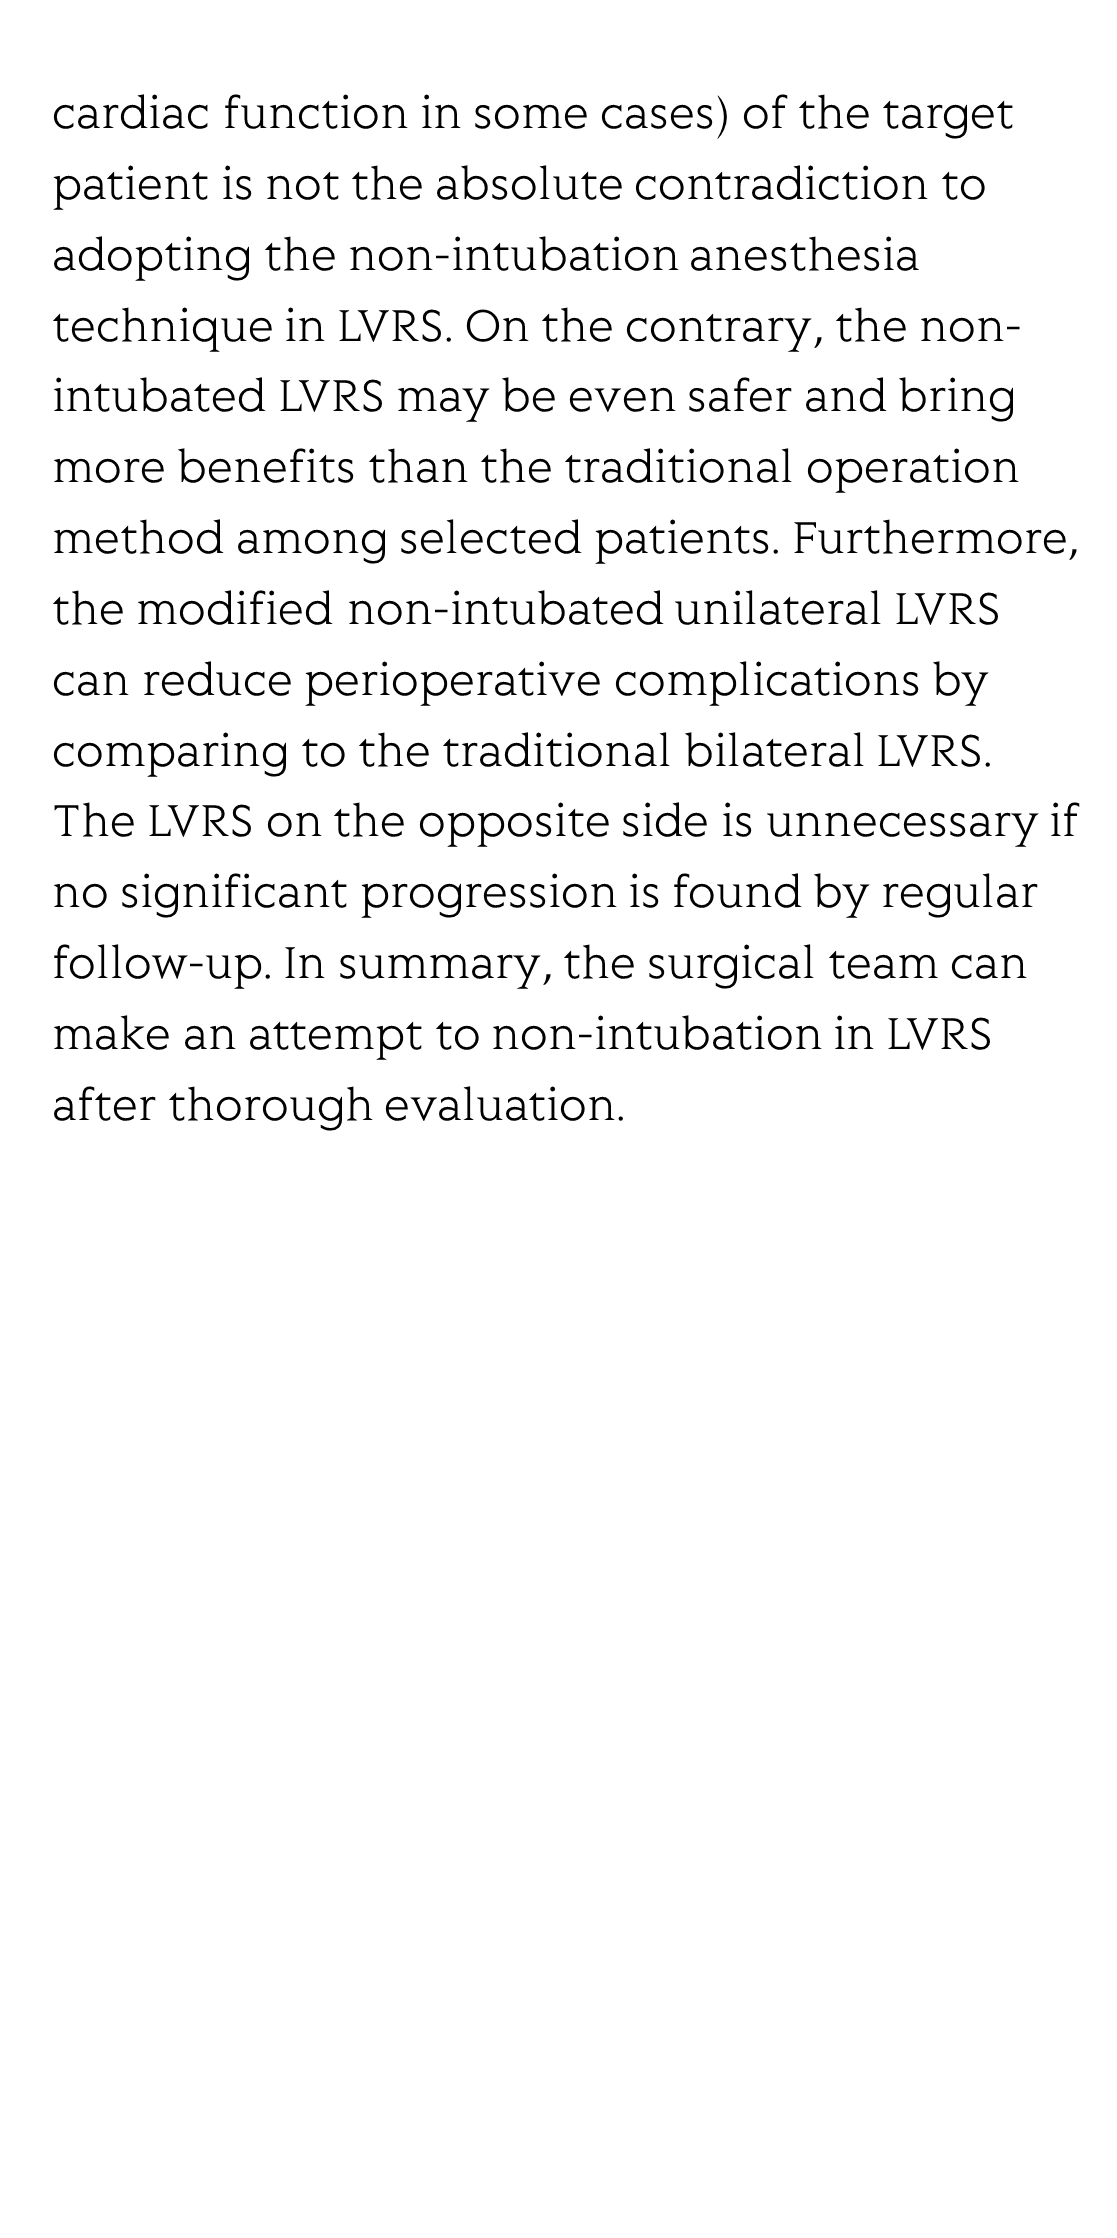 Literature review: non-intubated (tubeless) VATS for lung volume reduction surgery_3